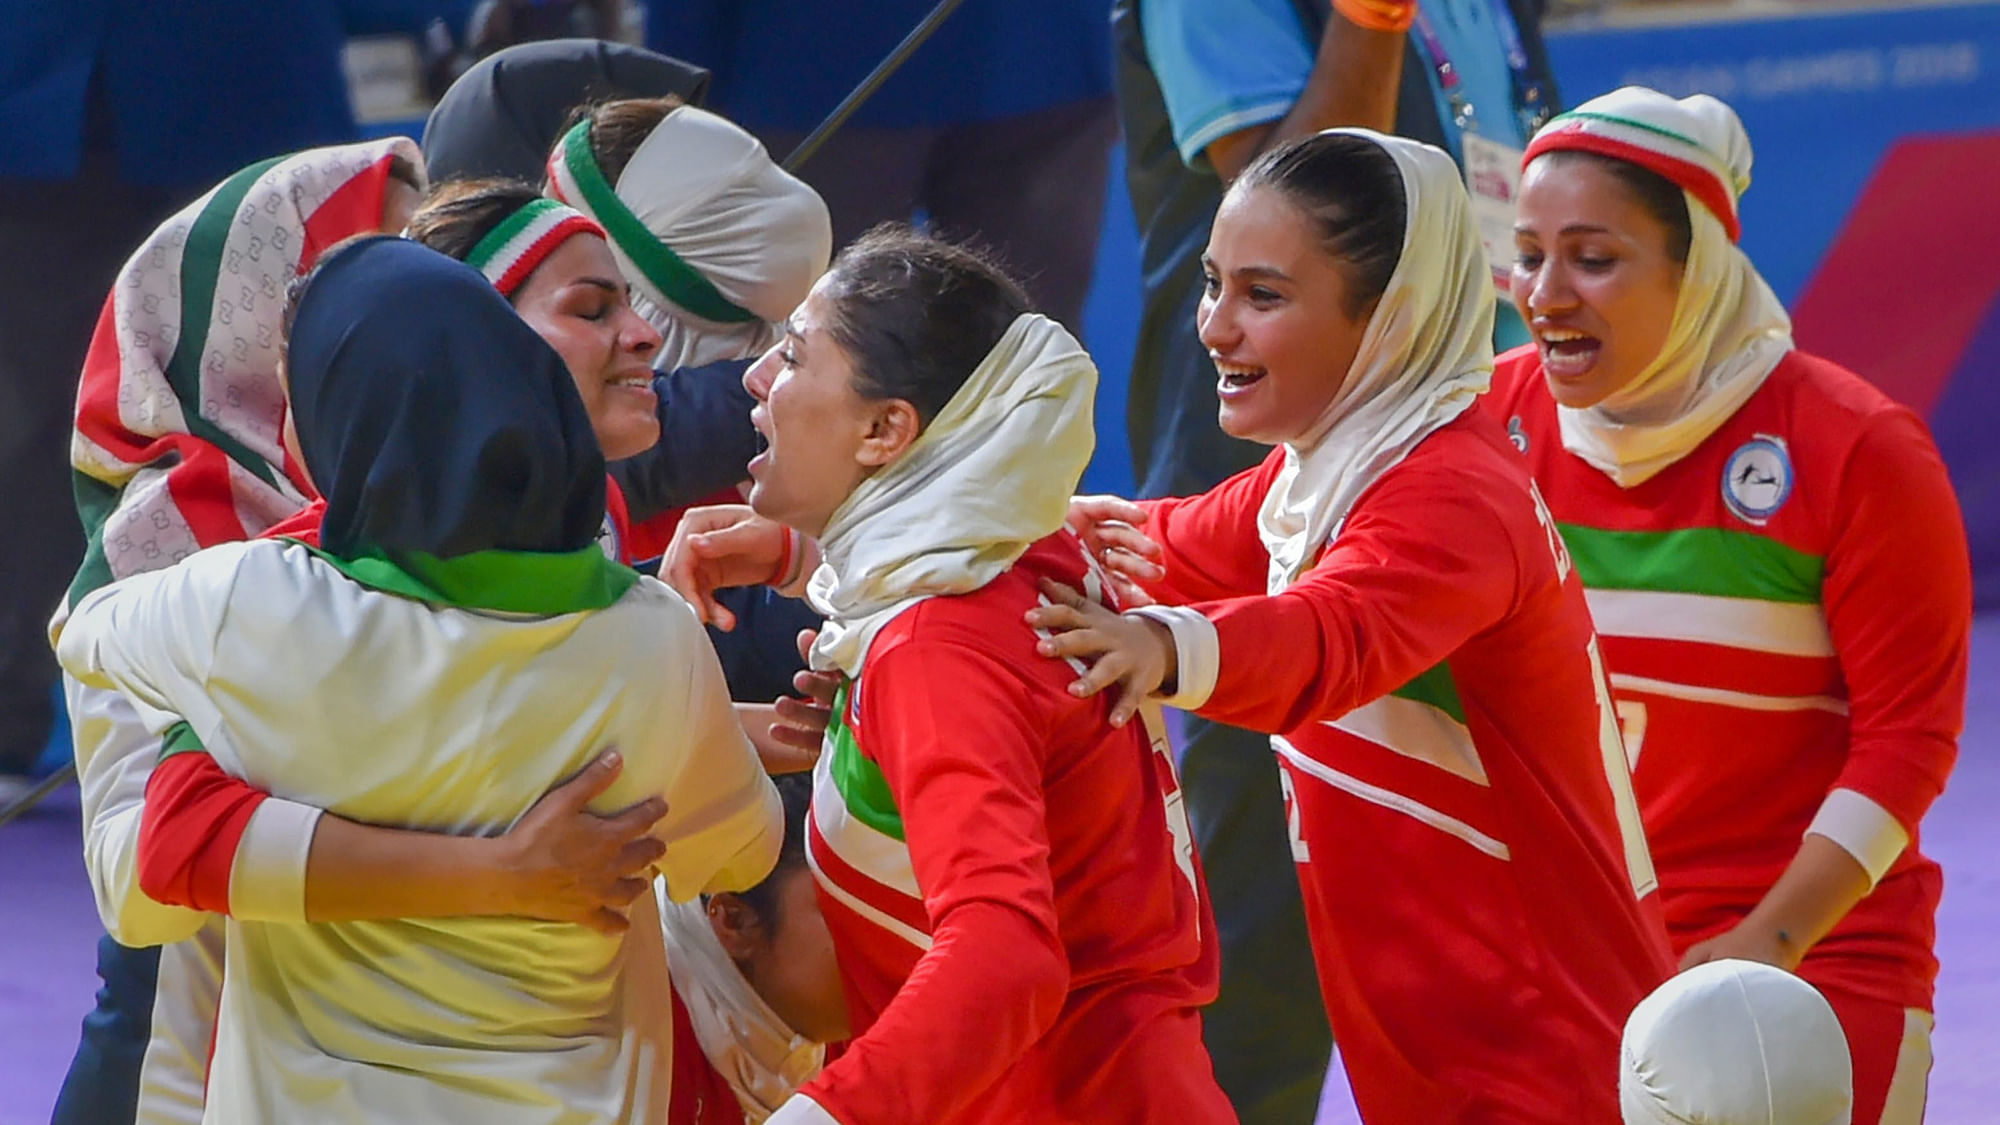 Iran’s women’s kabaddi team won their first-ever gold in the event at the Asian Games after beating two-time defending champions India in the final.